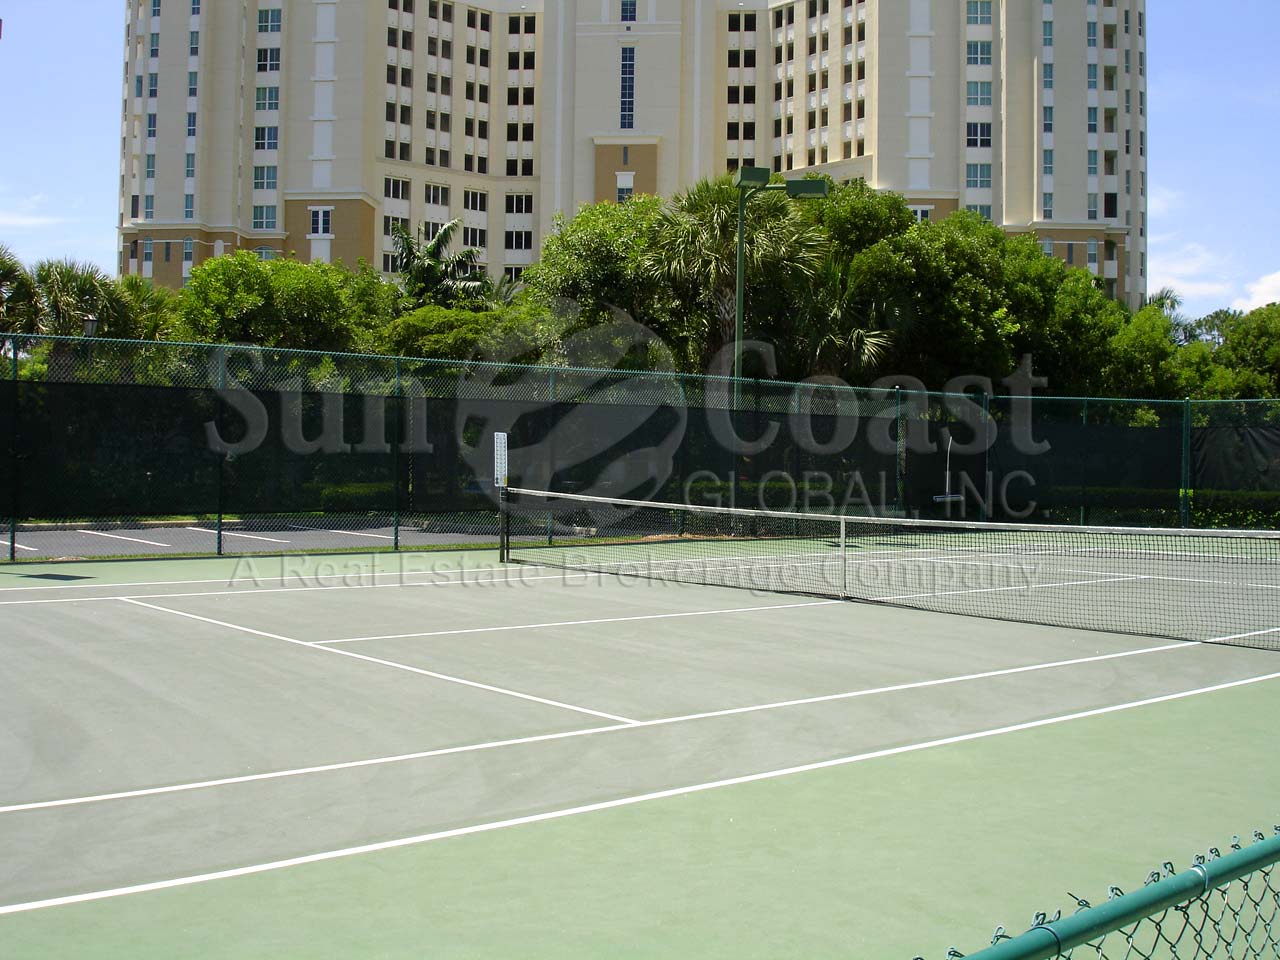 THE DUNES Tennis Courts